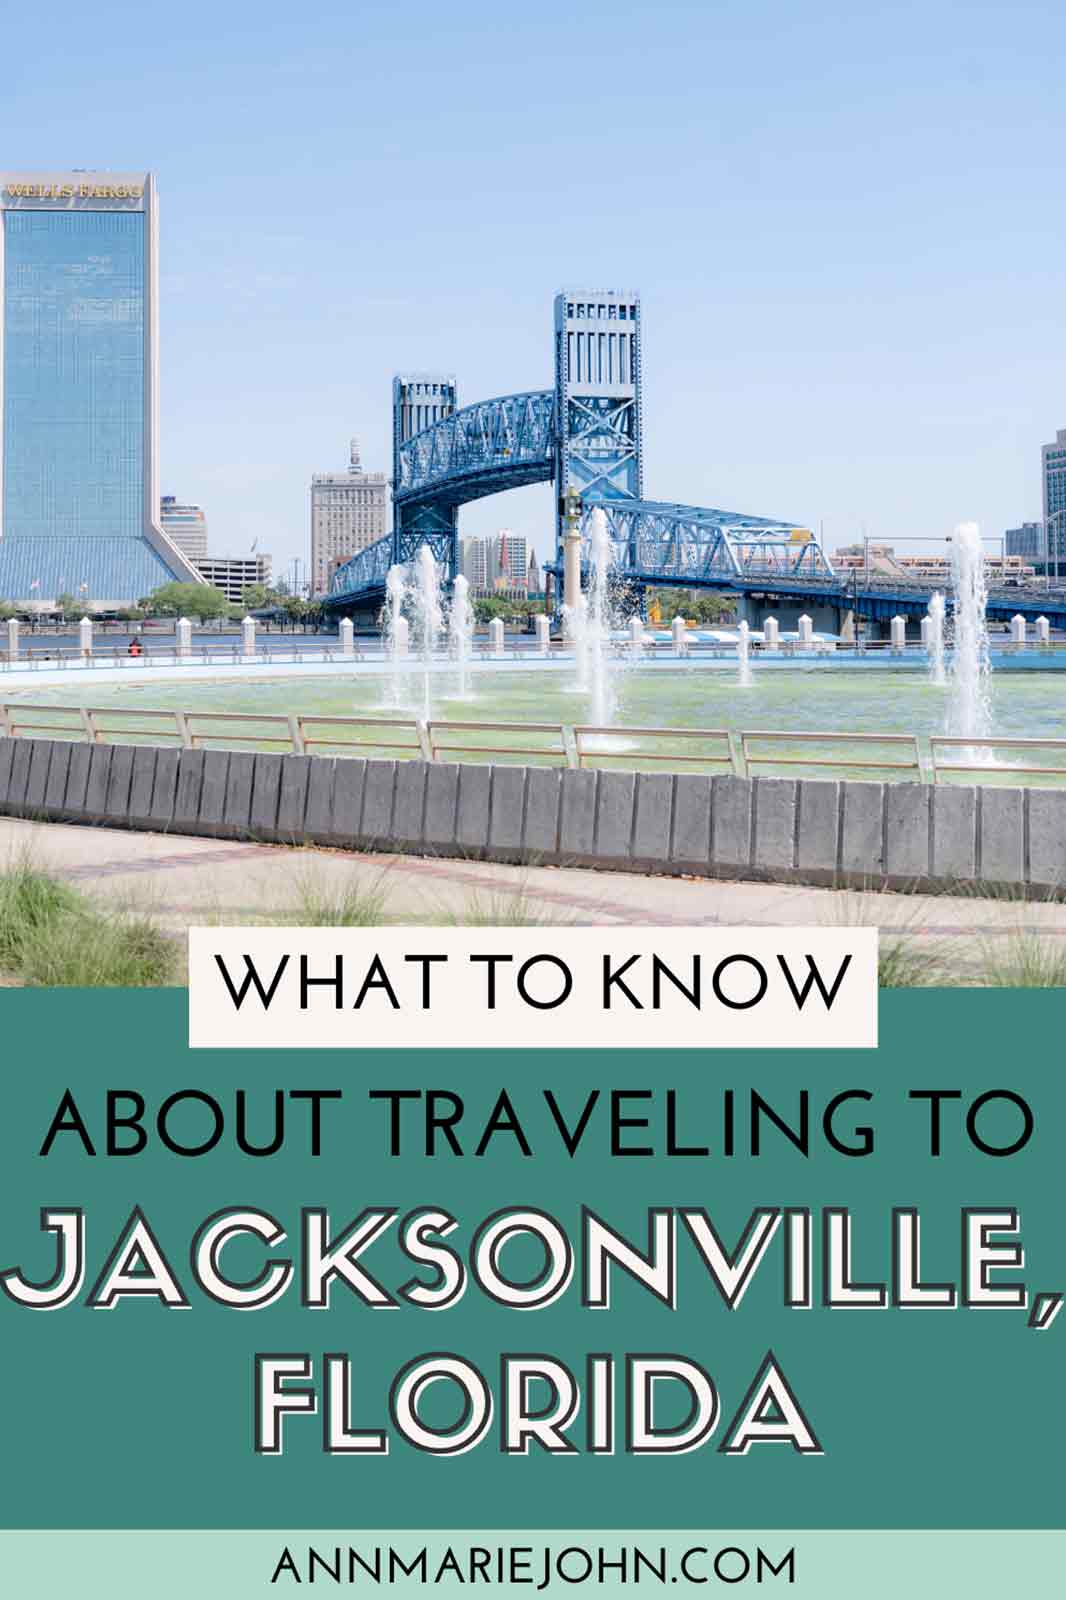 What to Know About Traveling to Jacksonville Florida